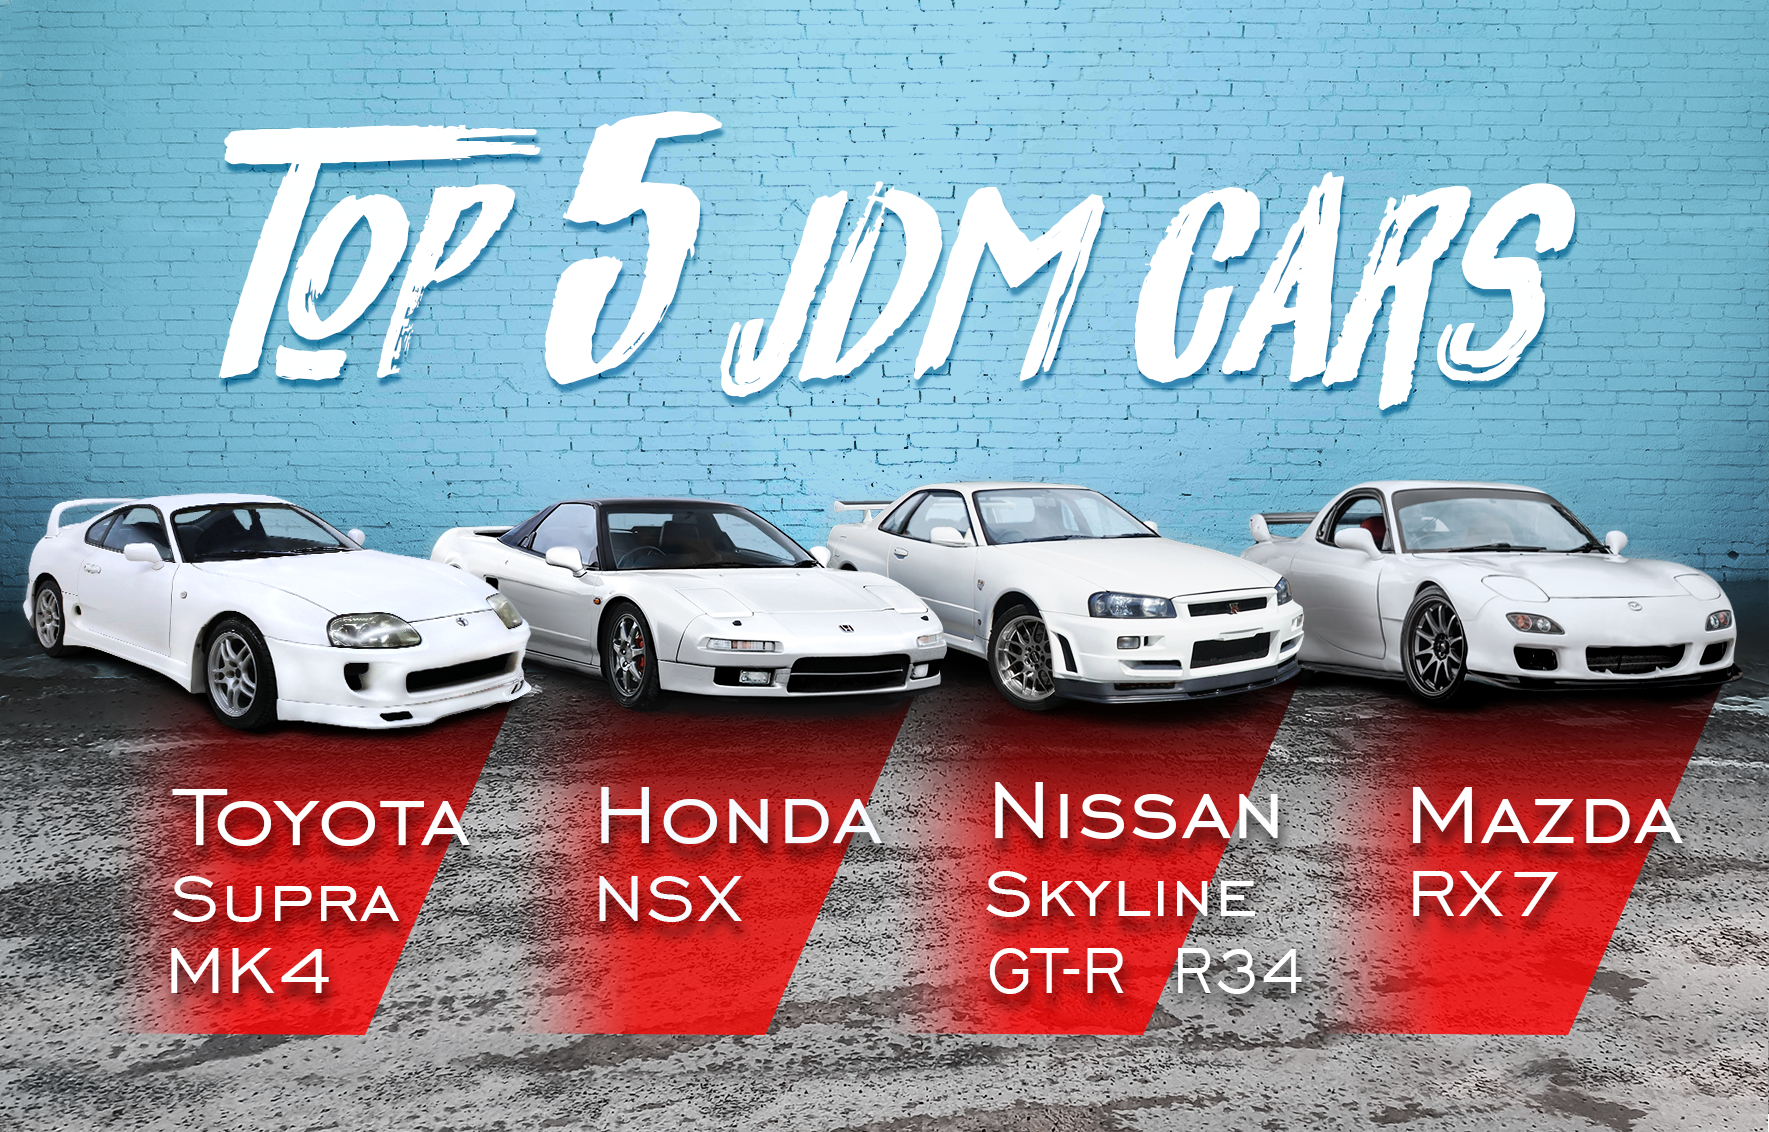 The top 5 JDM cars of all time